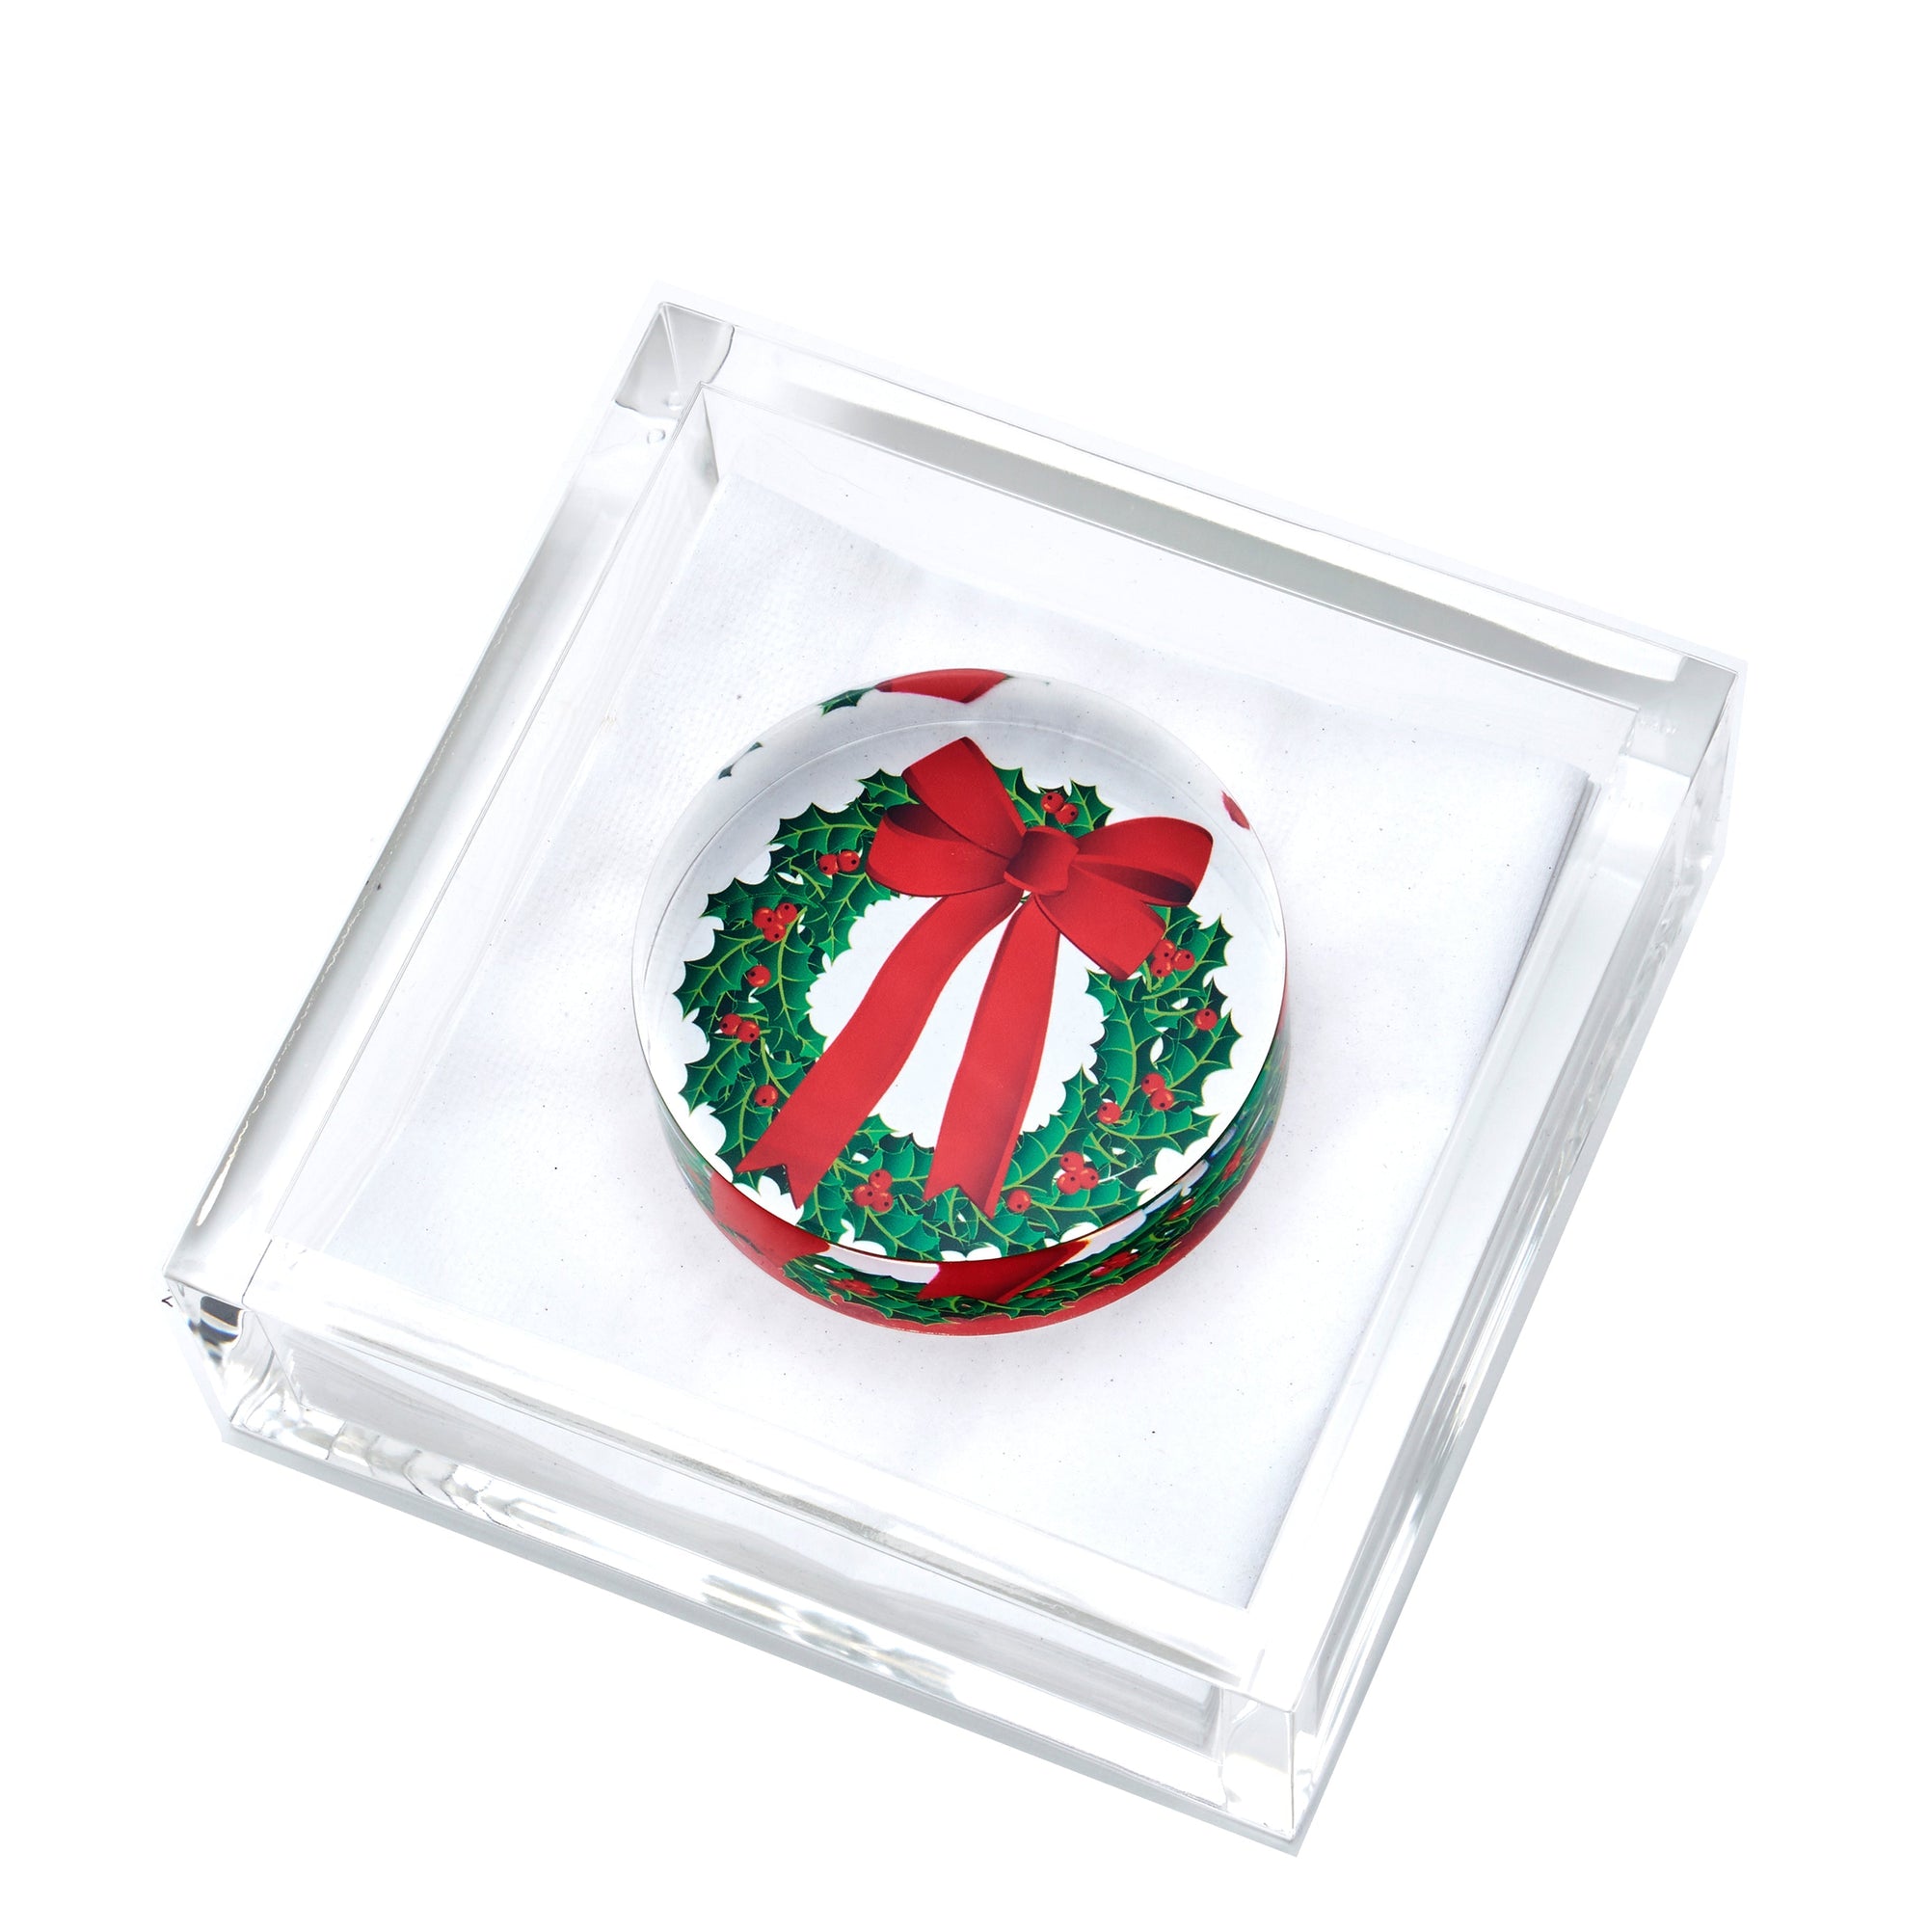 Cocktail Napkin Holder WREATH 4 inches by 4 inches 